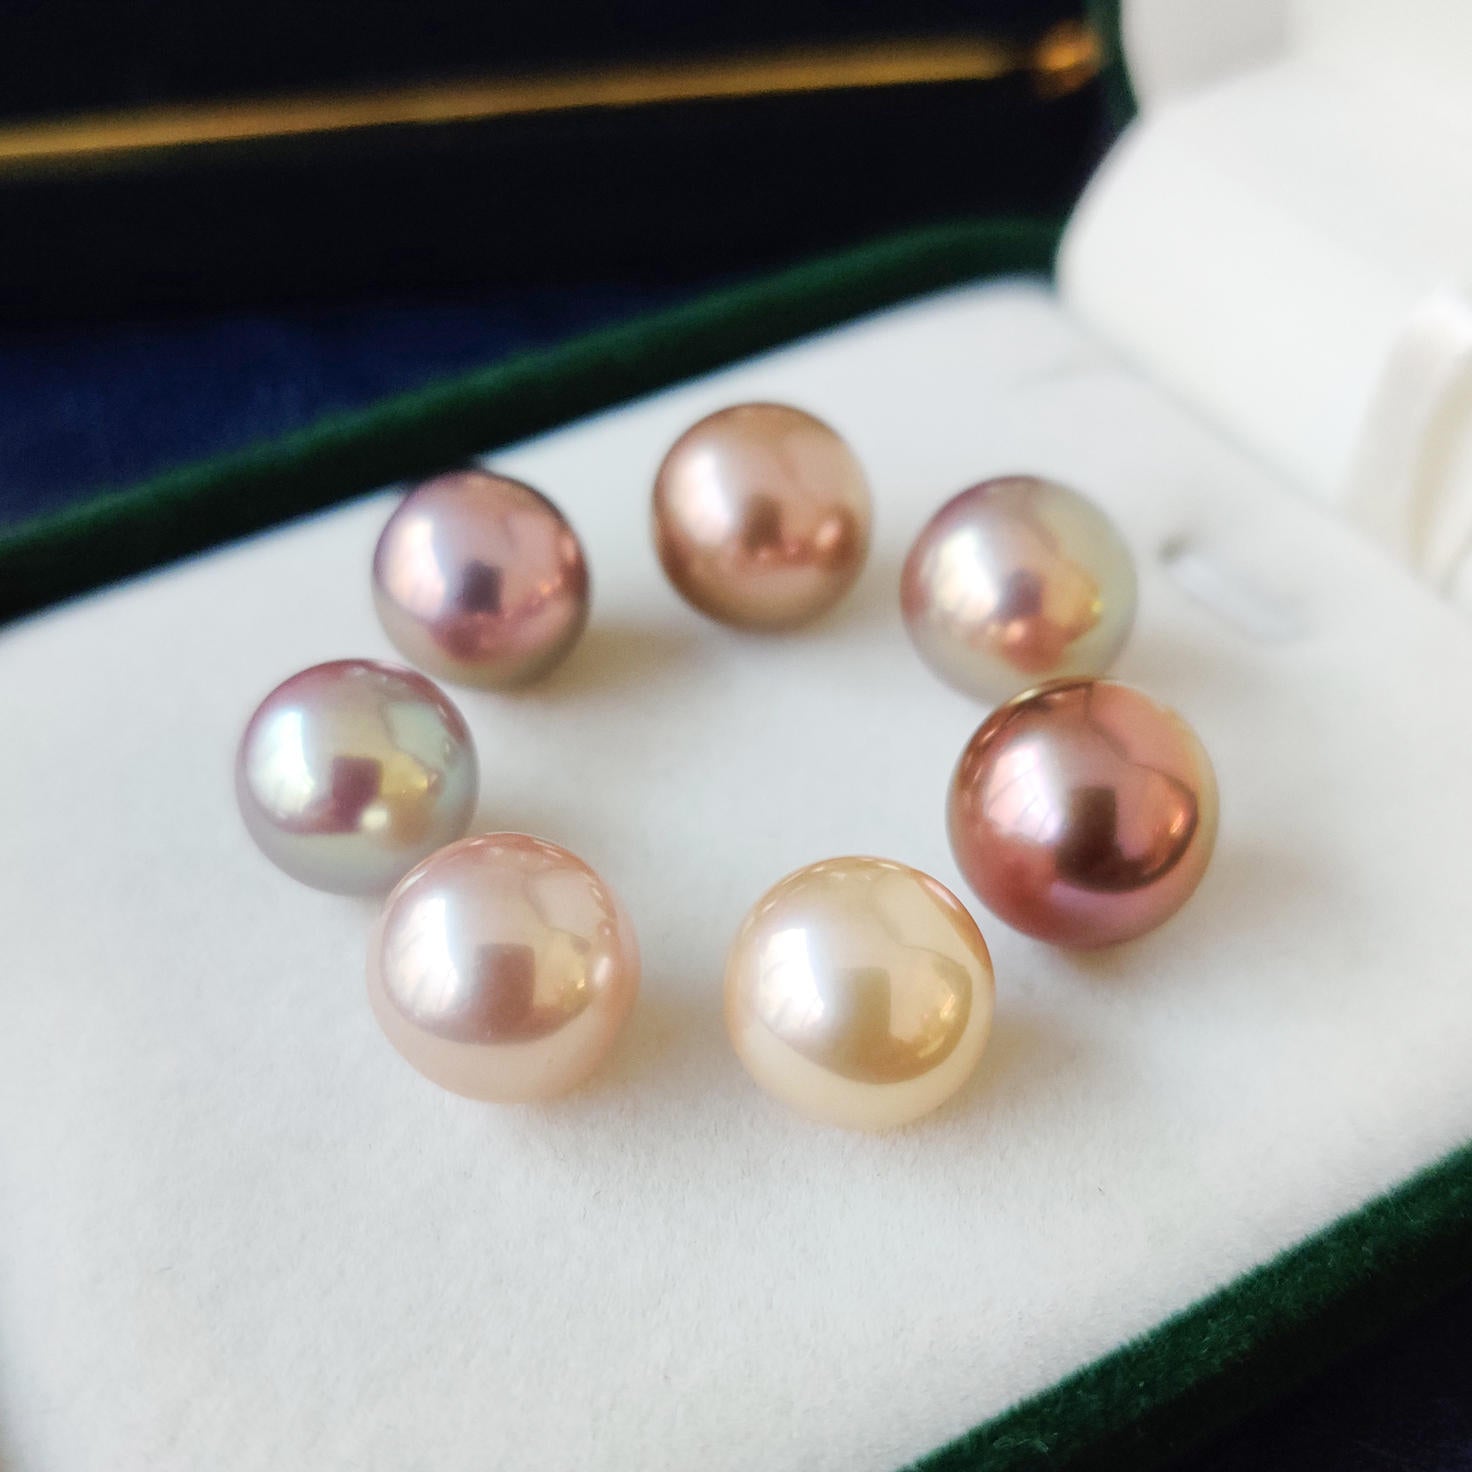  【Metallic Edison Lover】 Metallic Marvel (One 12-17mm Pearl With Mixed Color) 